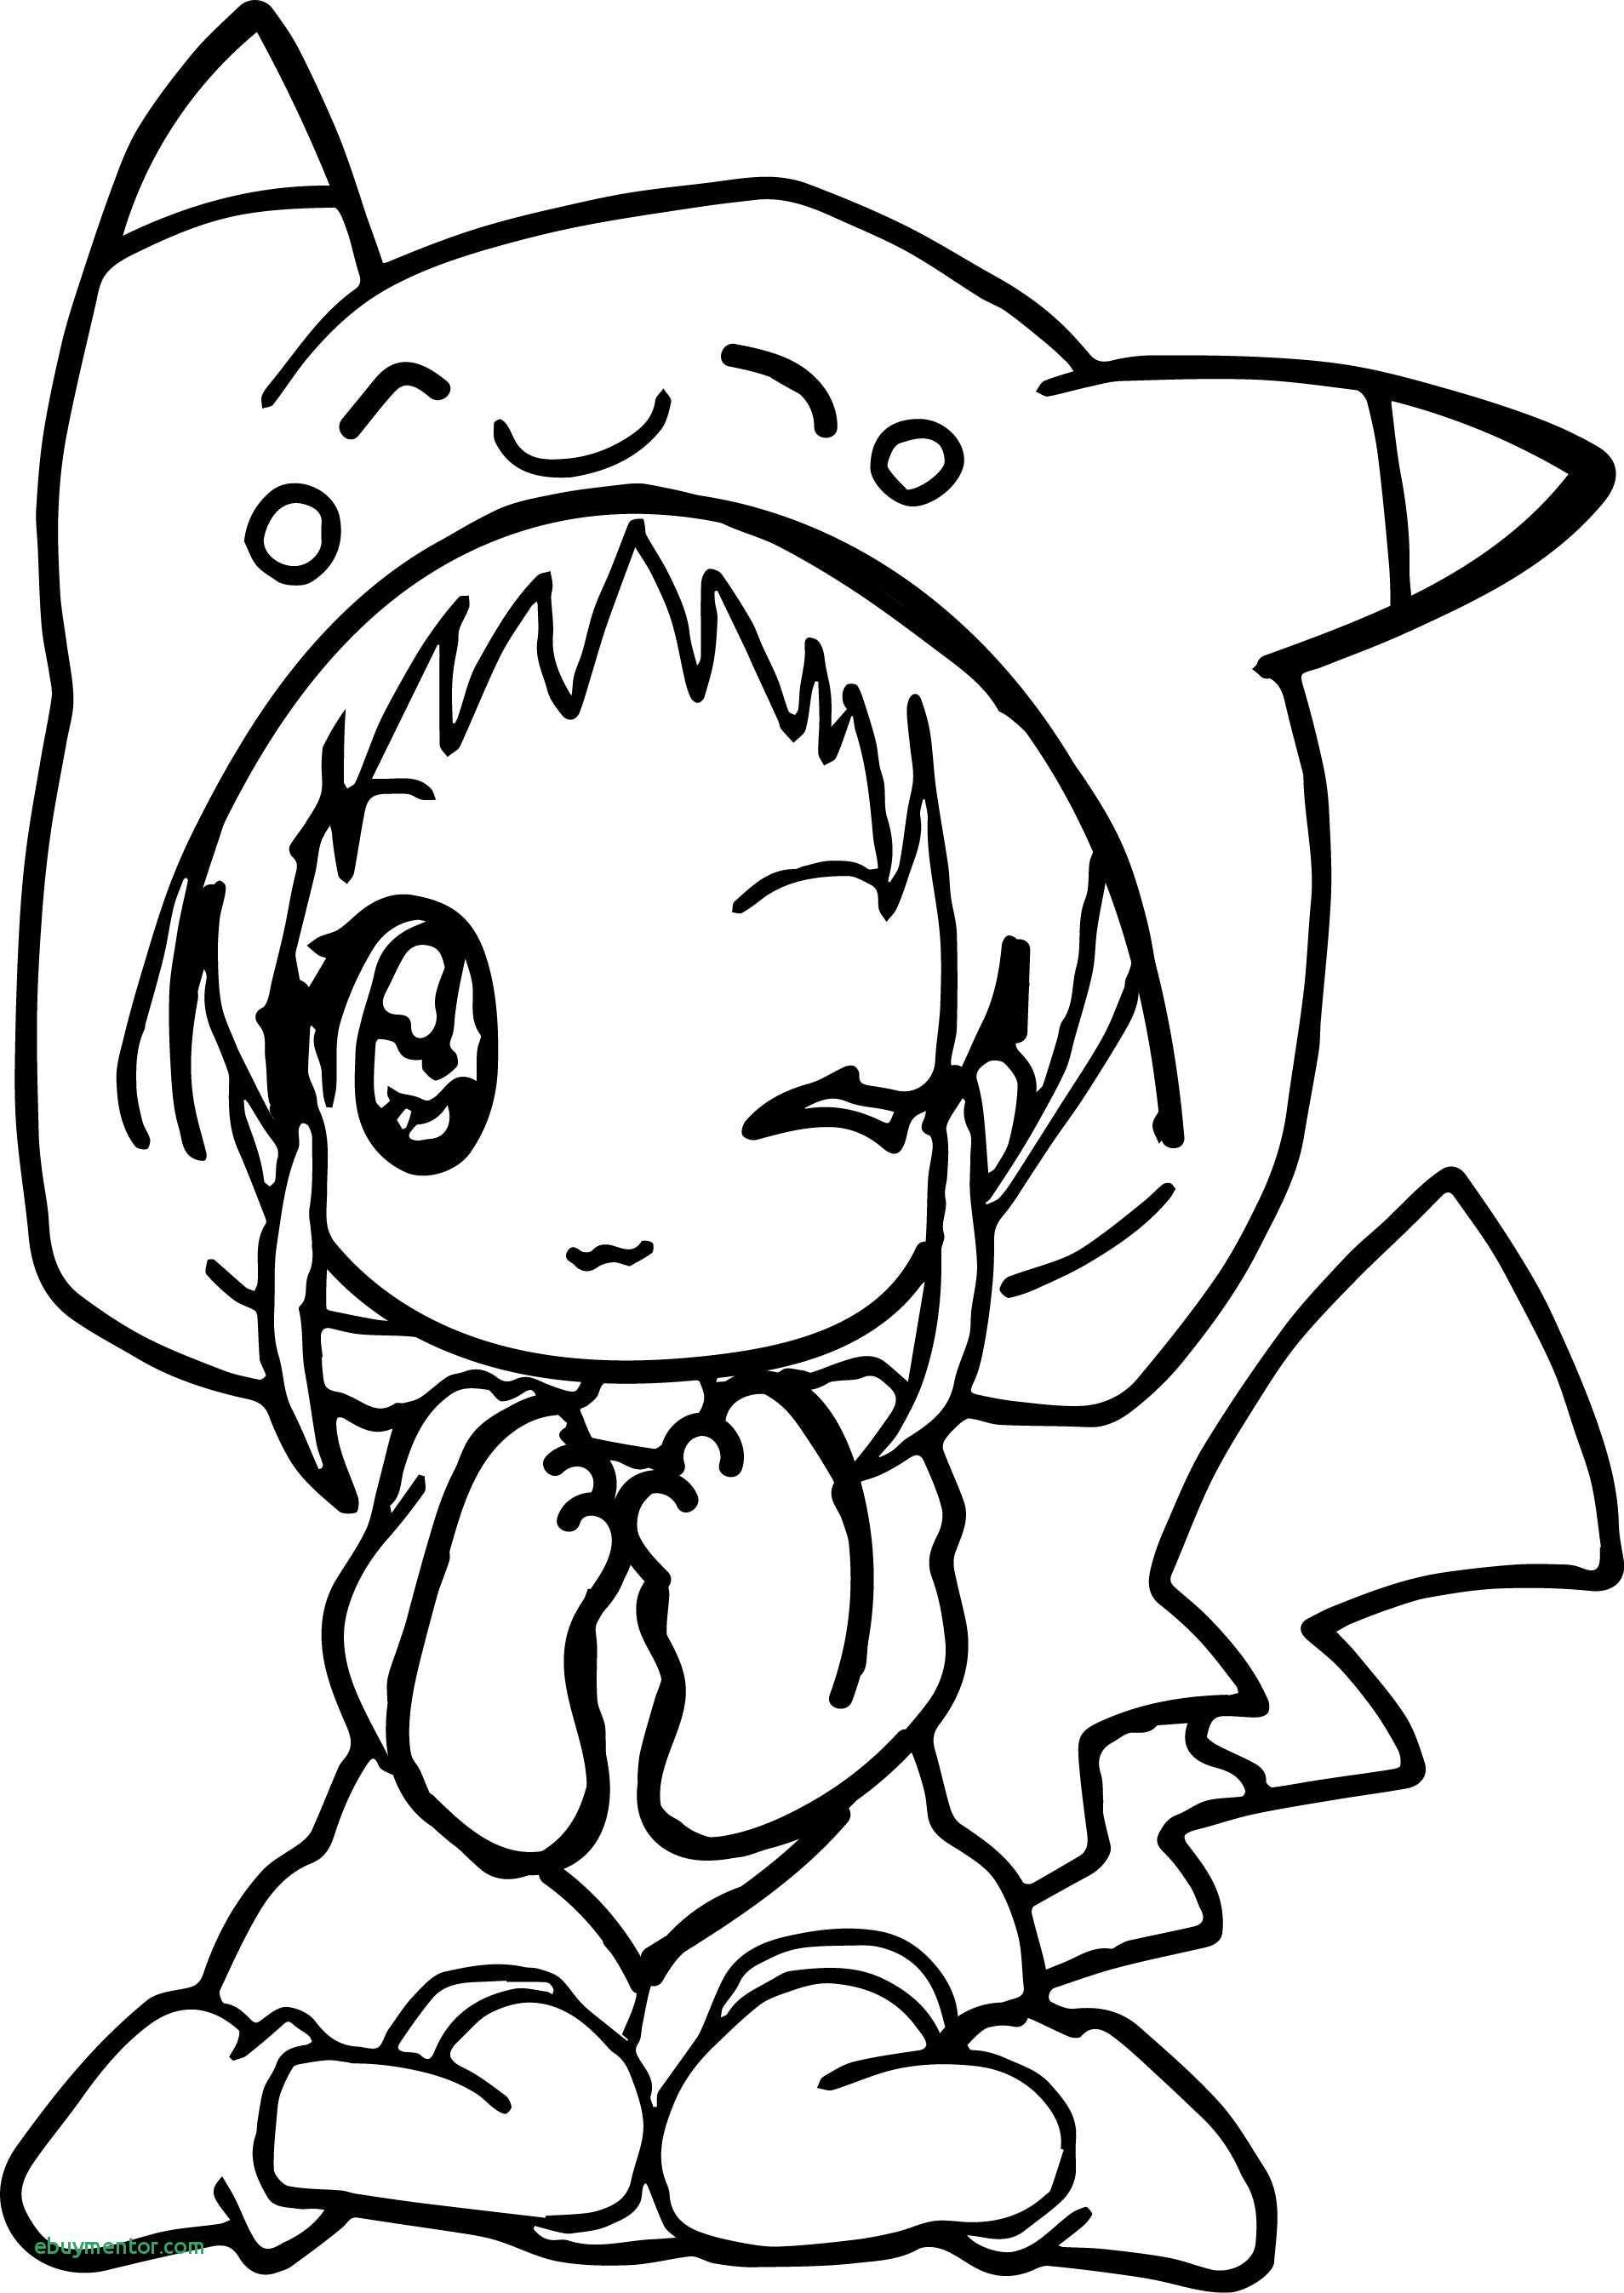 Girl Pikachu Coloring Pages Wallpaper